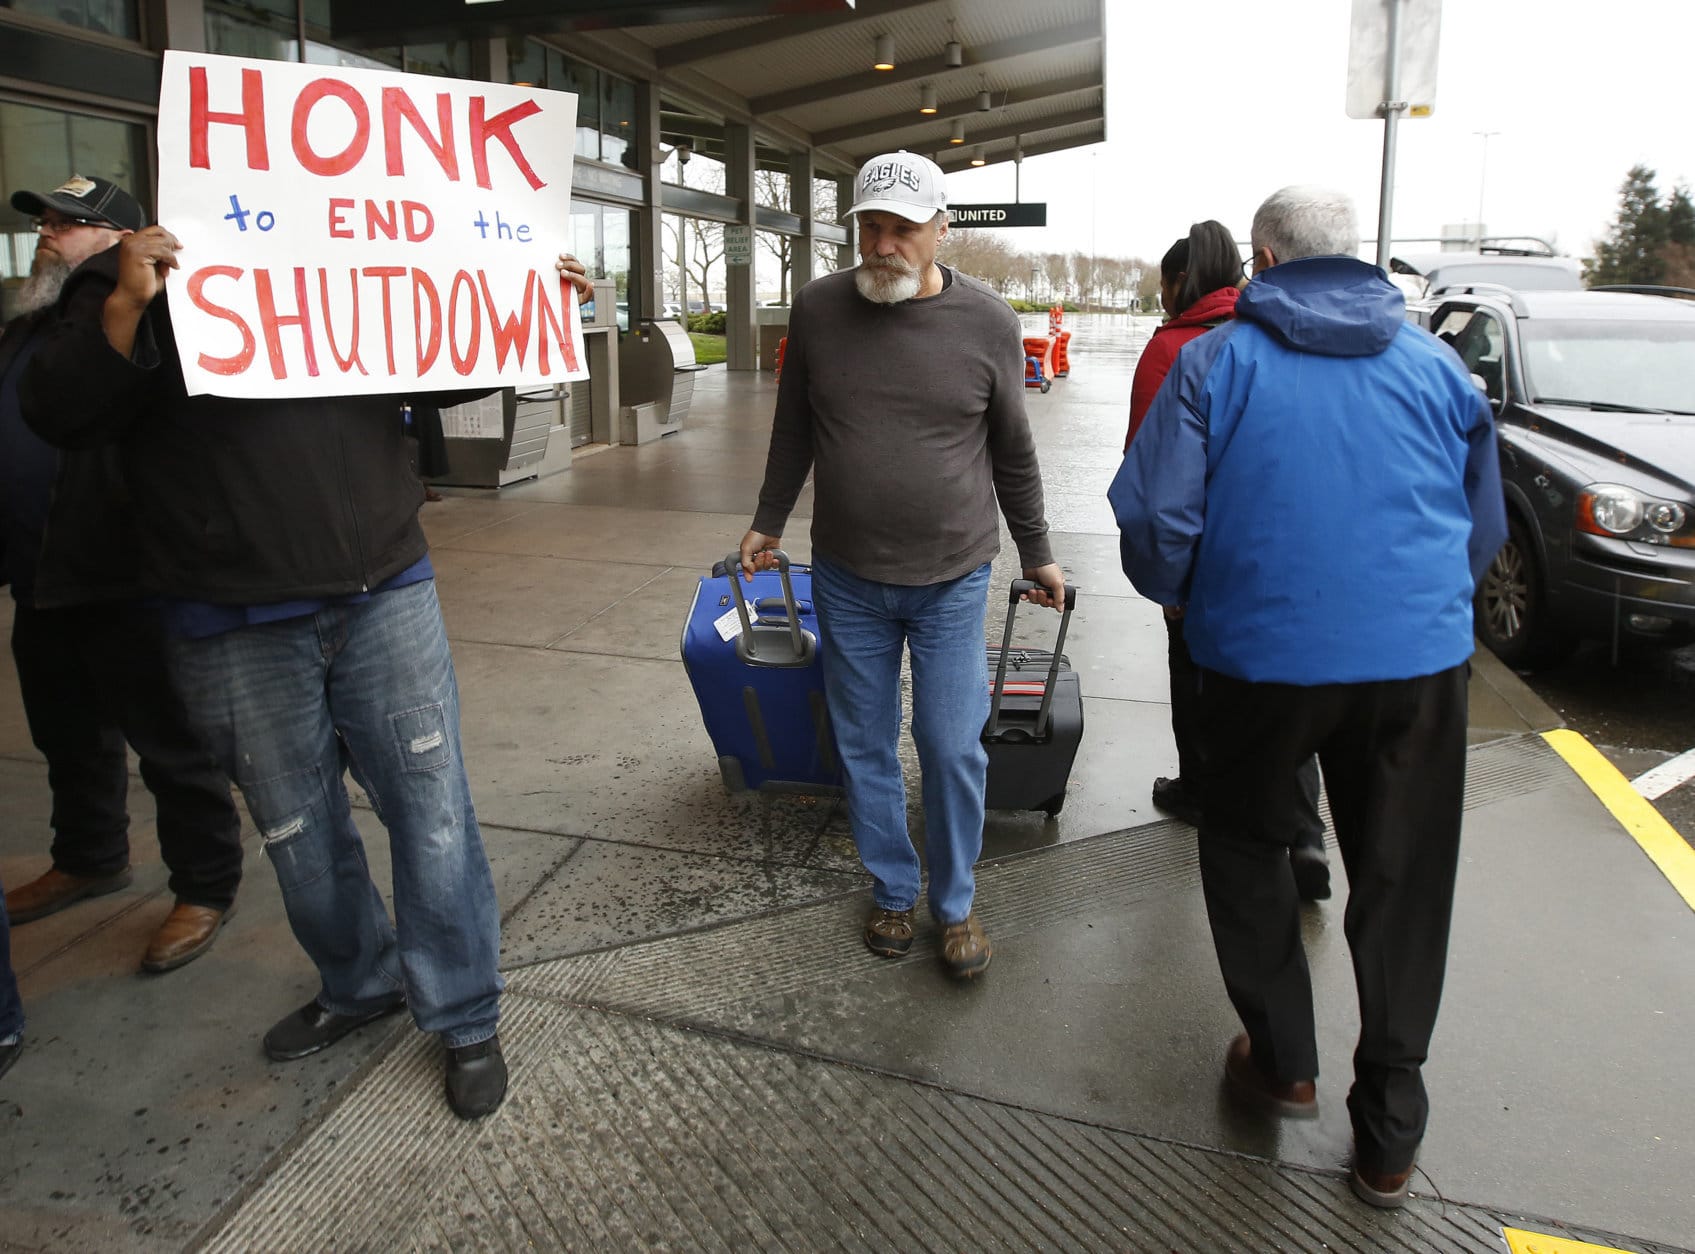 A man heading into the Sacramento International Airport passes demonstrators calling for President Donald Trump and Washington lawmakers to end the shutdown, Wednesday, Jan. 16, 2019, in Sacramento, Calif. More than two dozen federal employees and supporters called for an end to the partial government shutdown now in its fourth week. (AP Photo/Rich Pedroncelli)